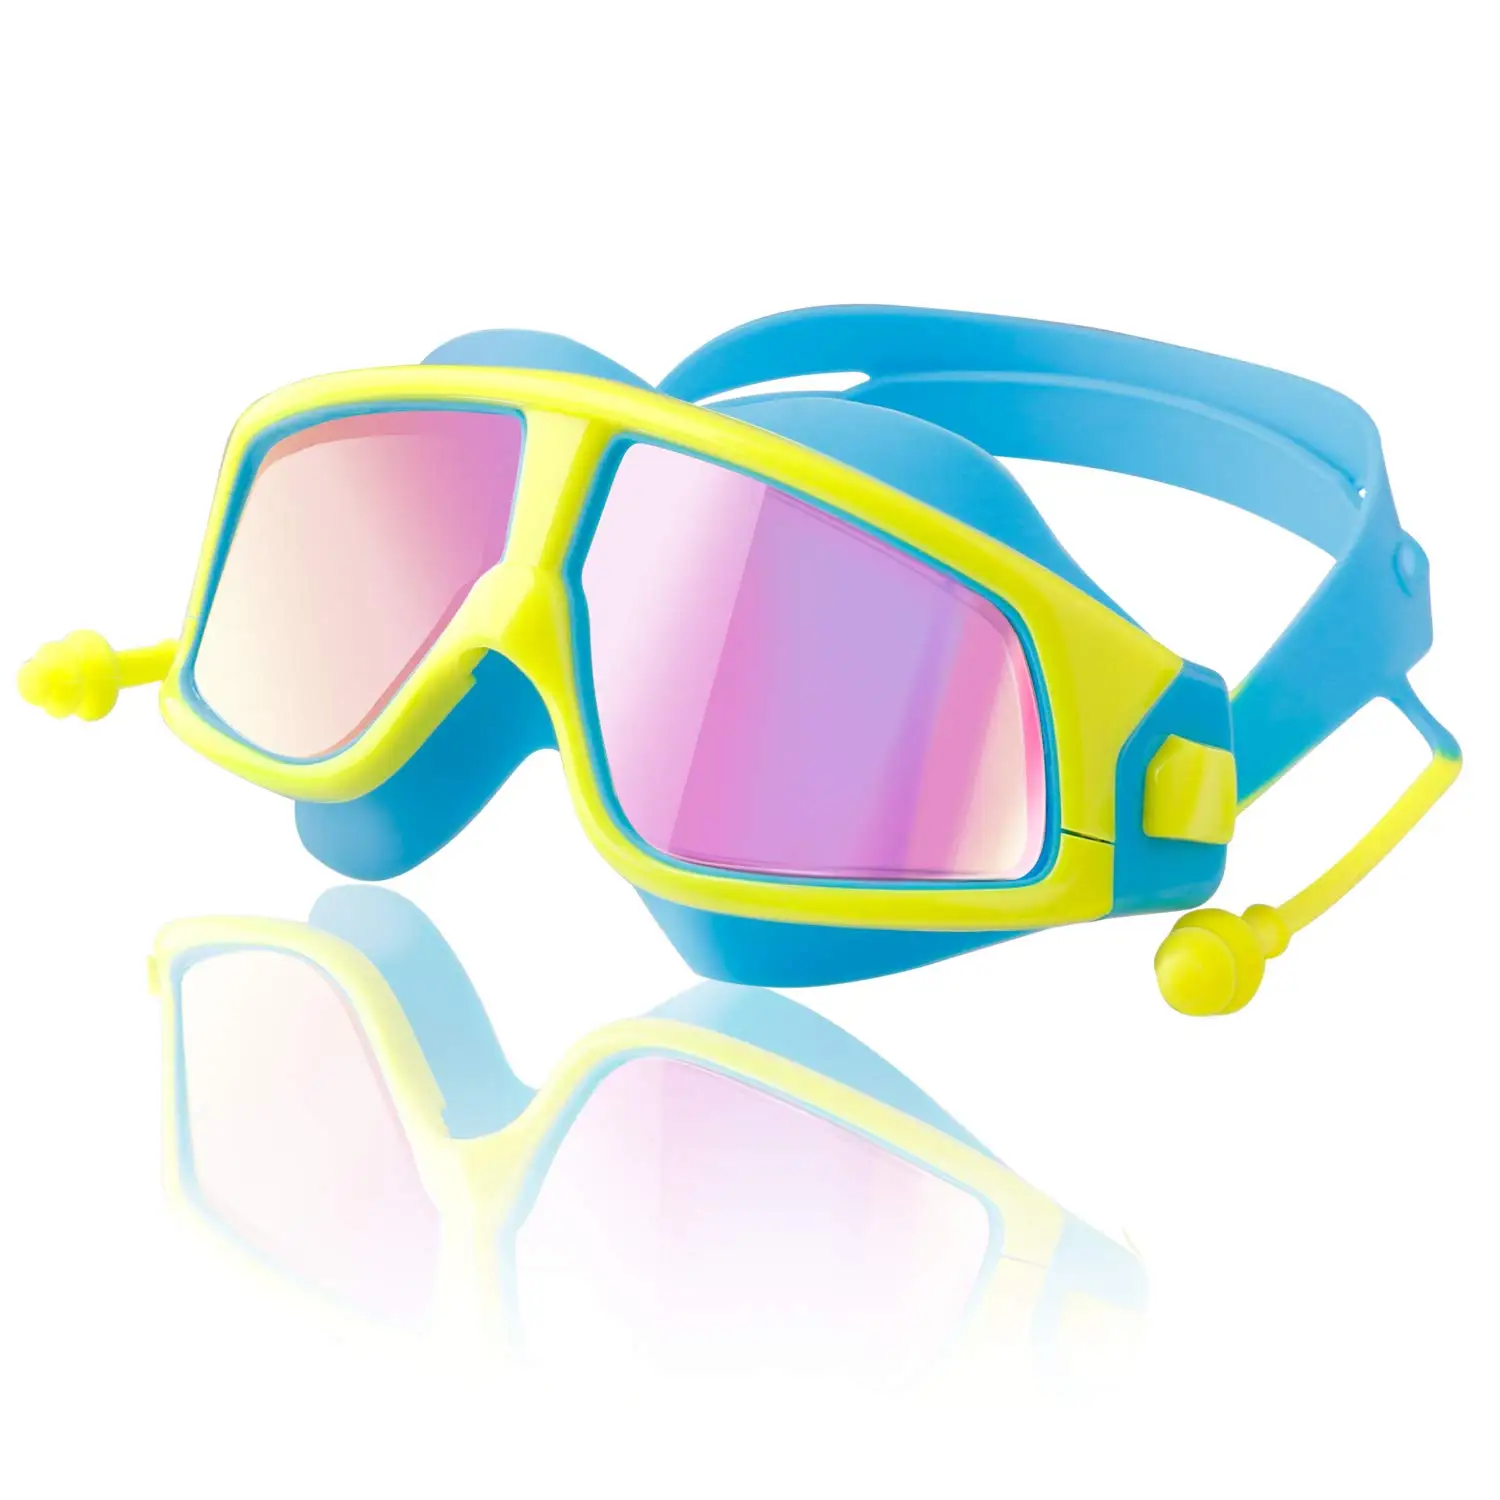 Details about   Unisex Swimming Goggles Swim Caps+Ear Plugs Nose Clip Anti-Fog UV Protection US 